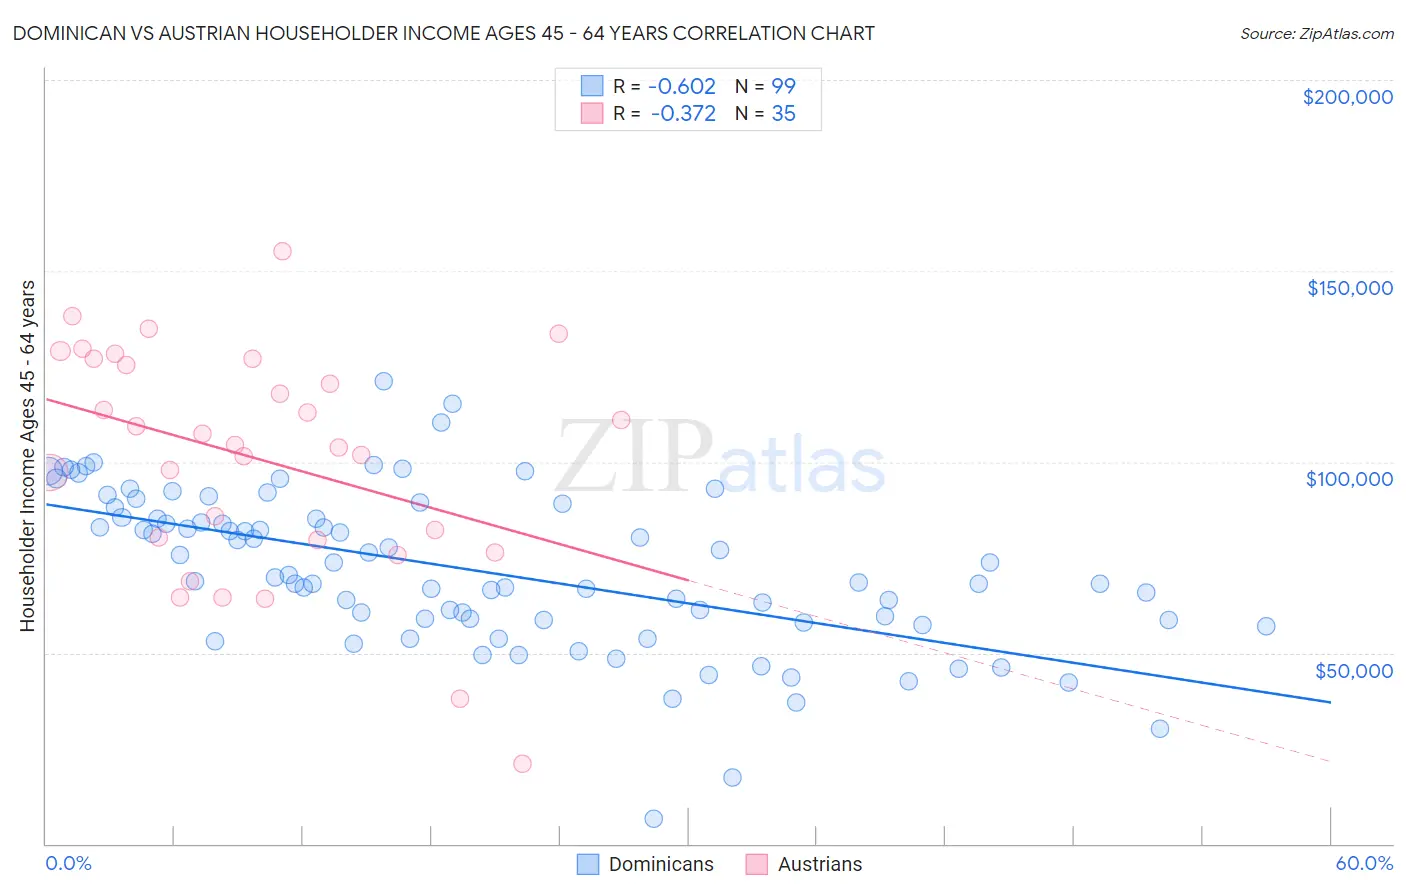 Dominican vs Austrian Householder Income Ages 45 - 64 years